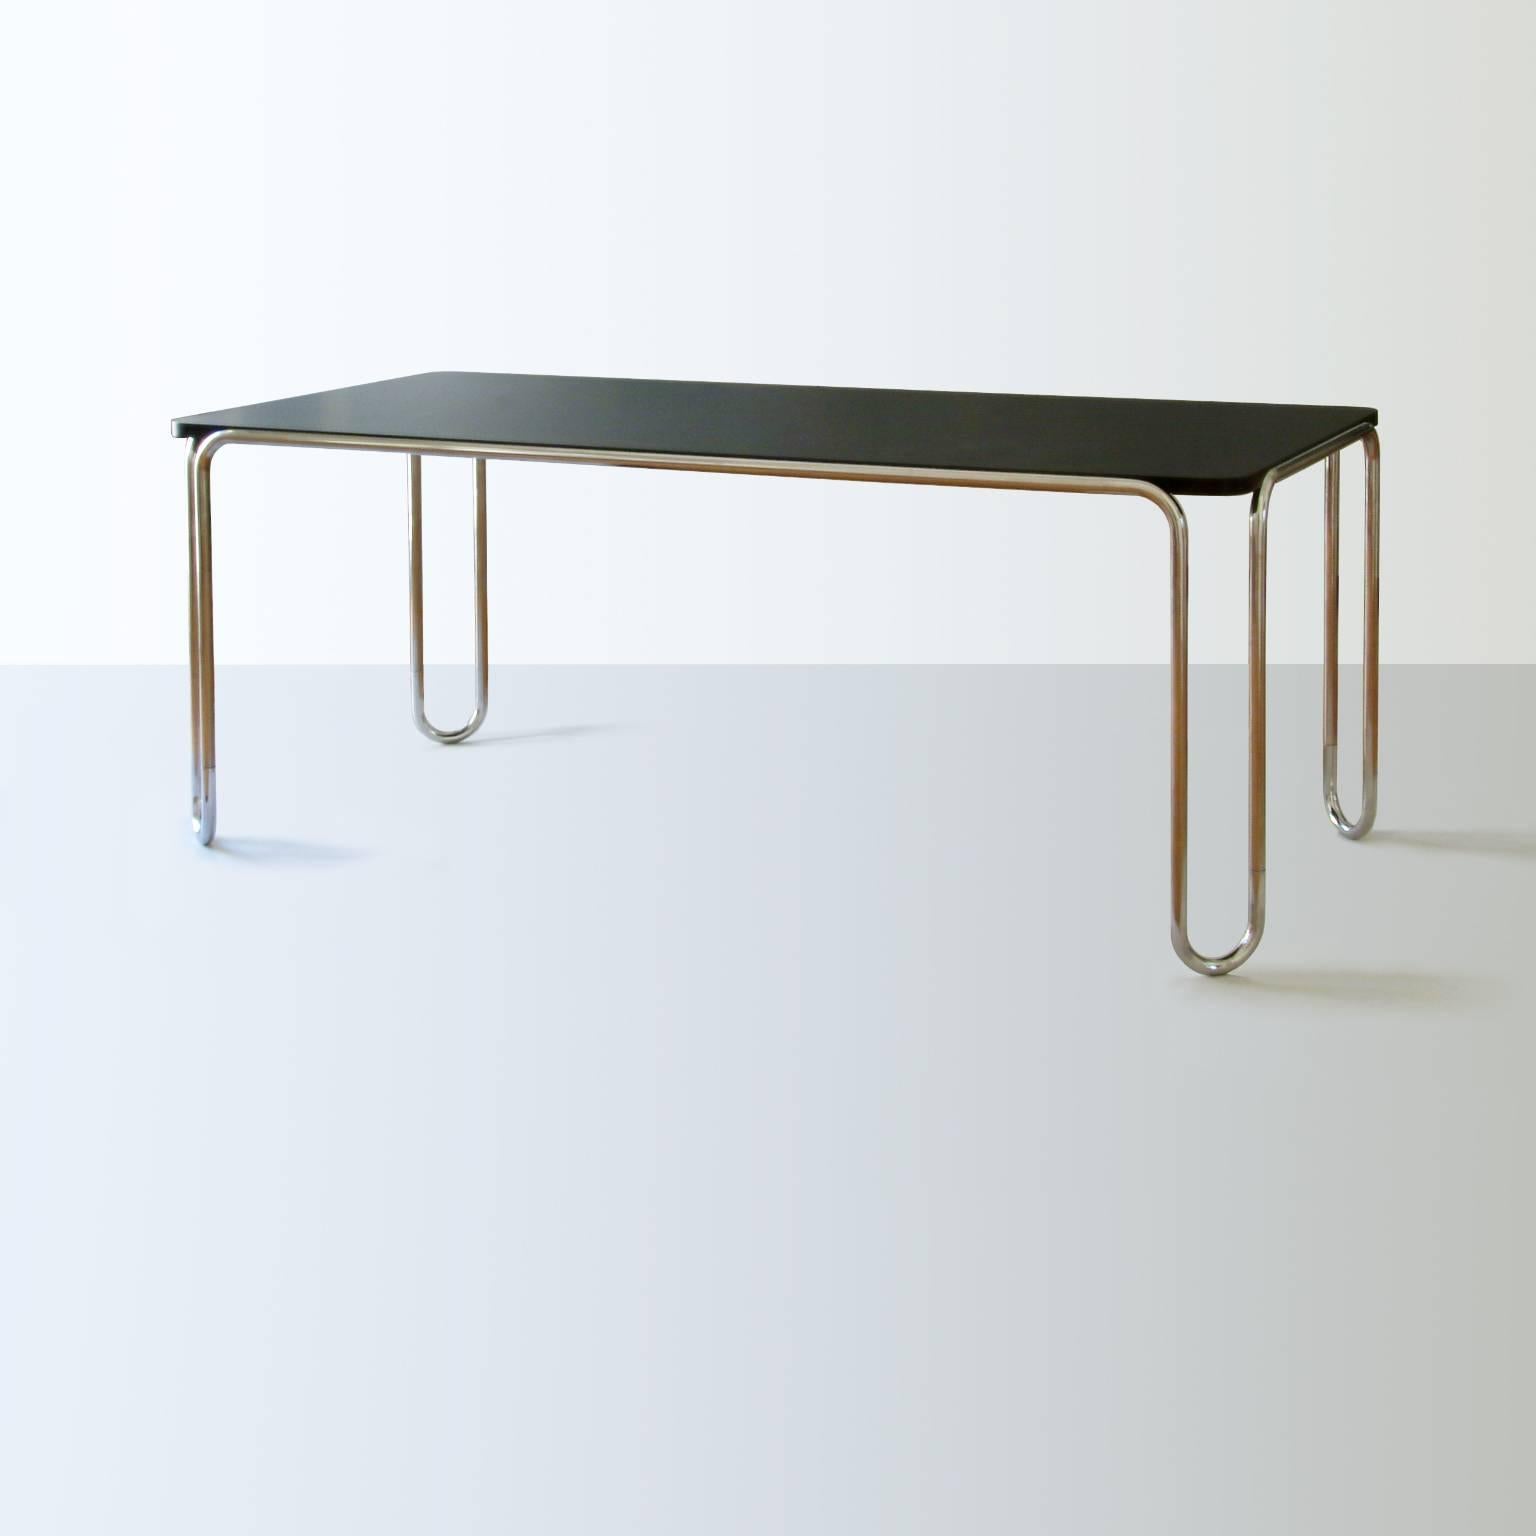 Modernist ultra-thin tubular-steel table designed and manufactured by GMD Berlin. Delivery time: 6-8 weeks. 